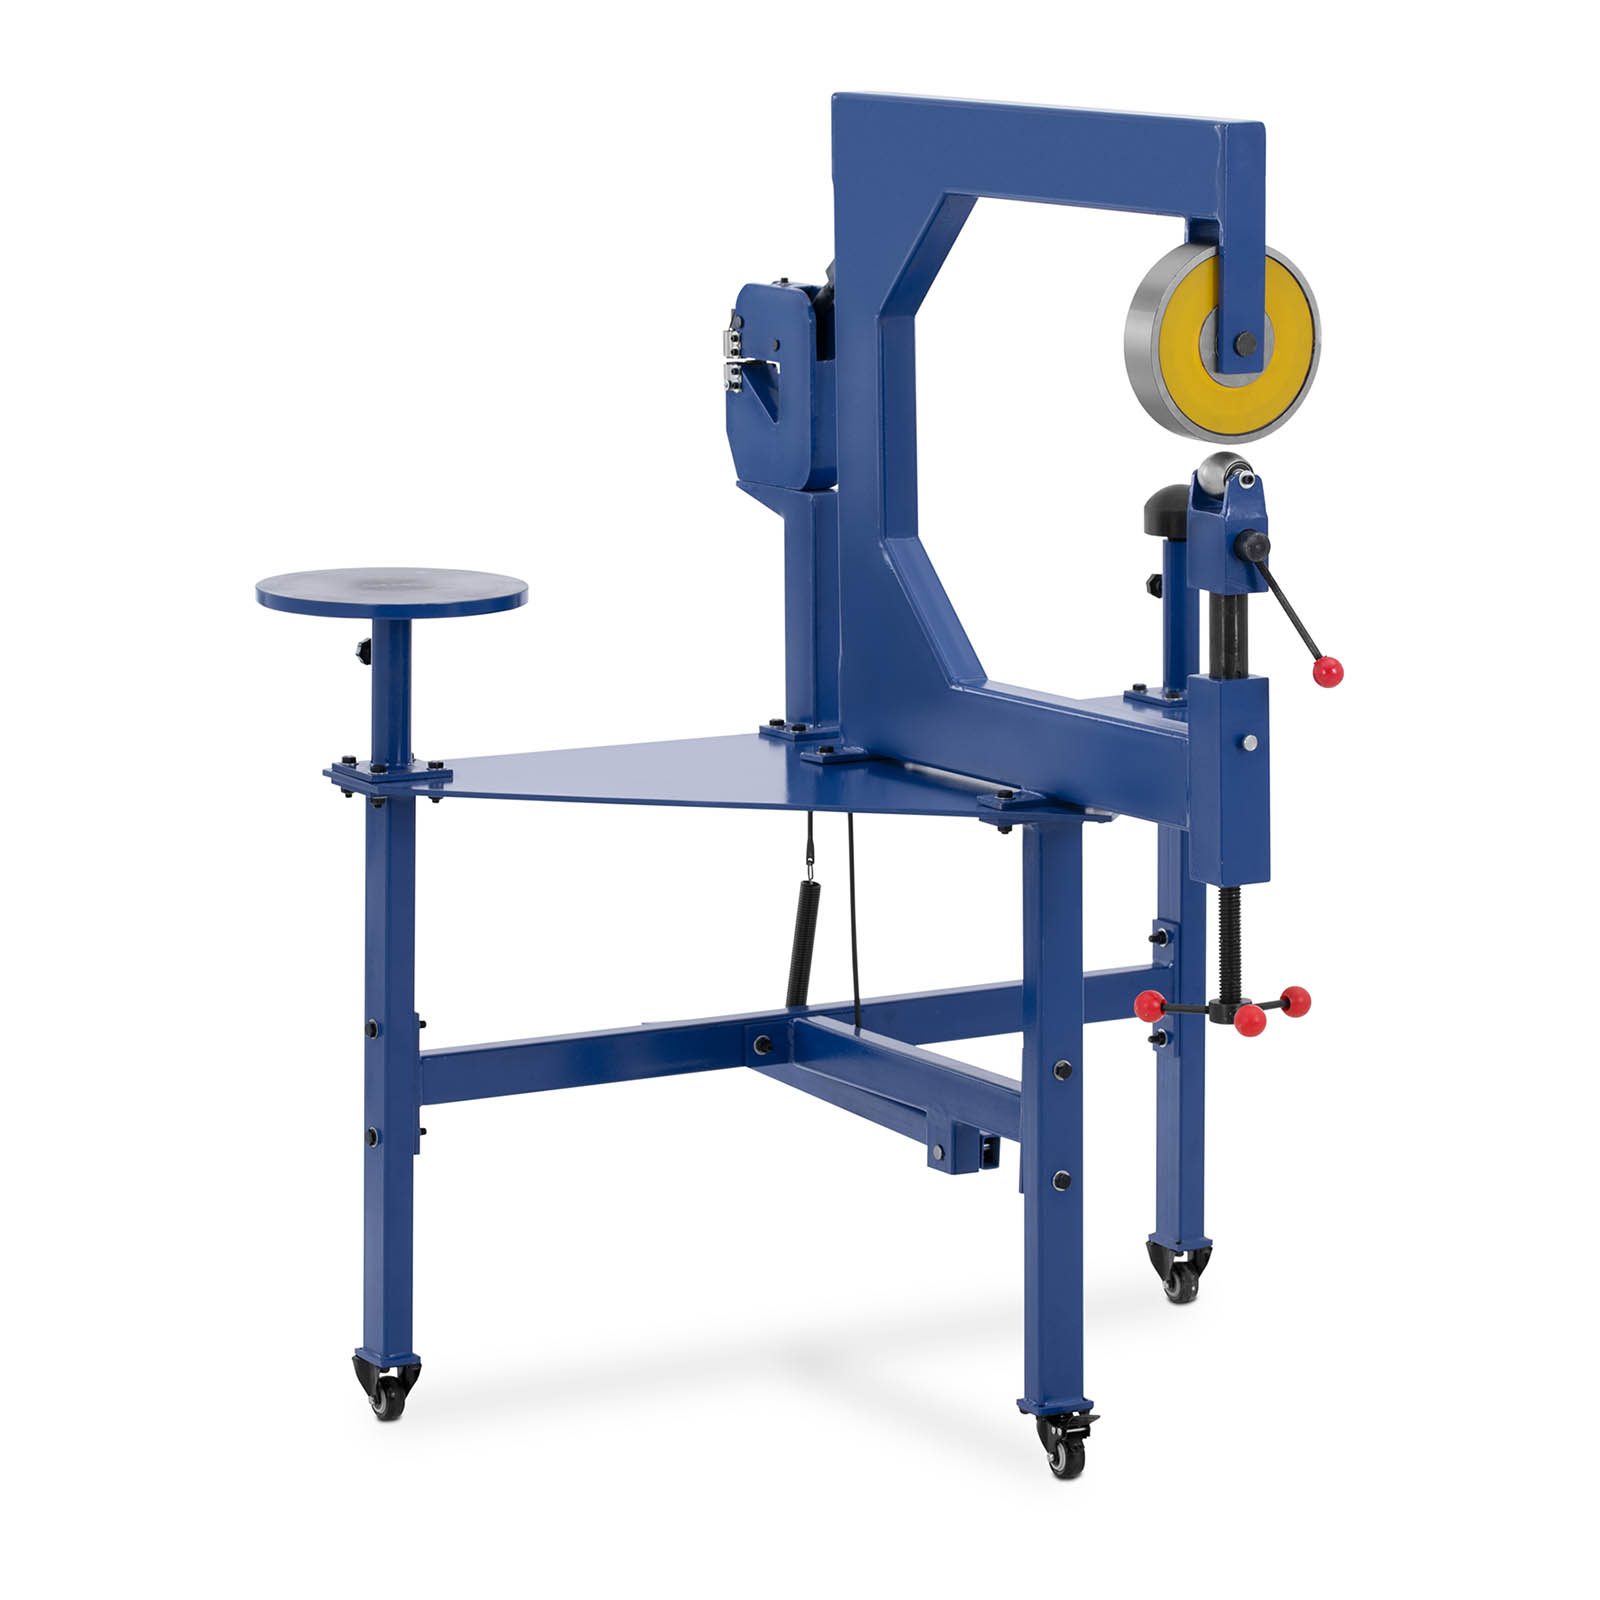 English wheel - 4-folding workstation - compressing and stretching device - sheets up to 1.5 mm